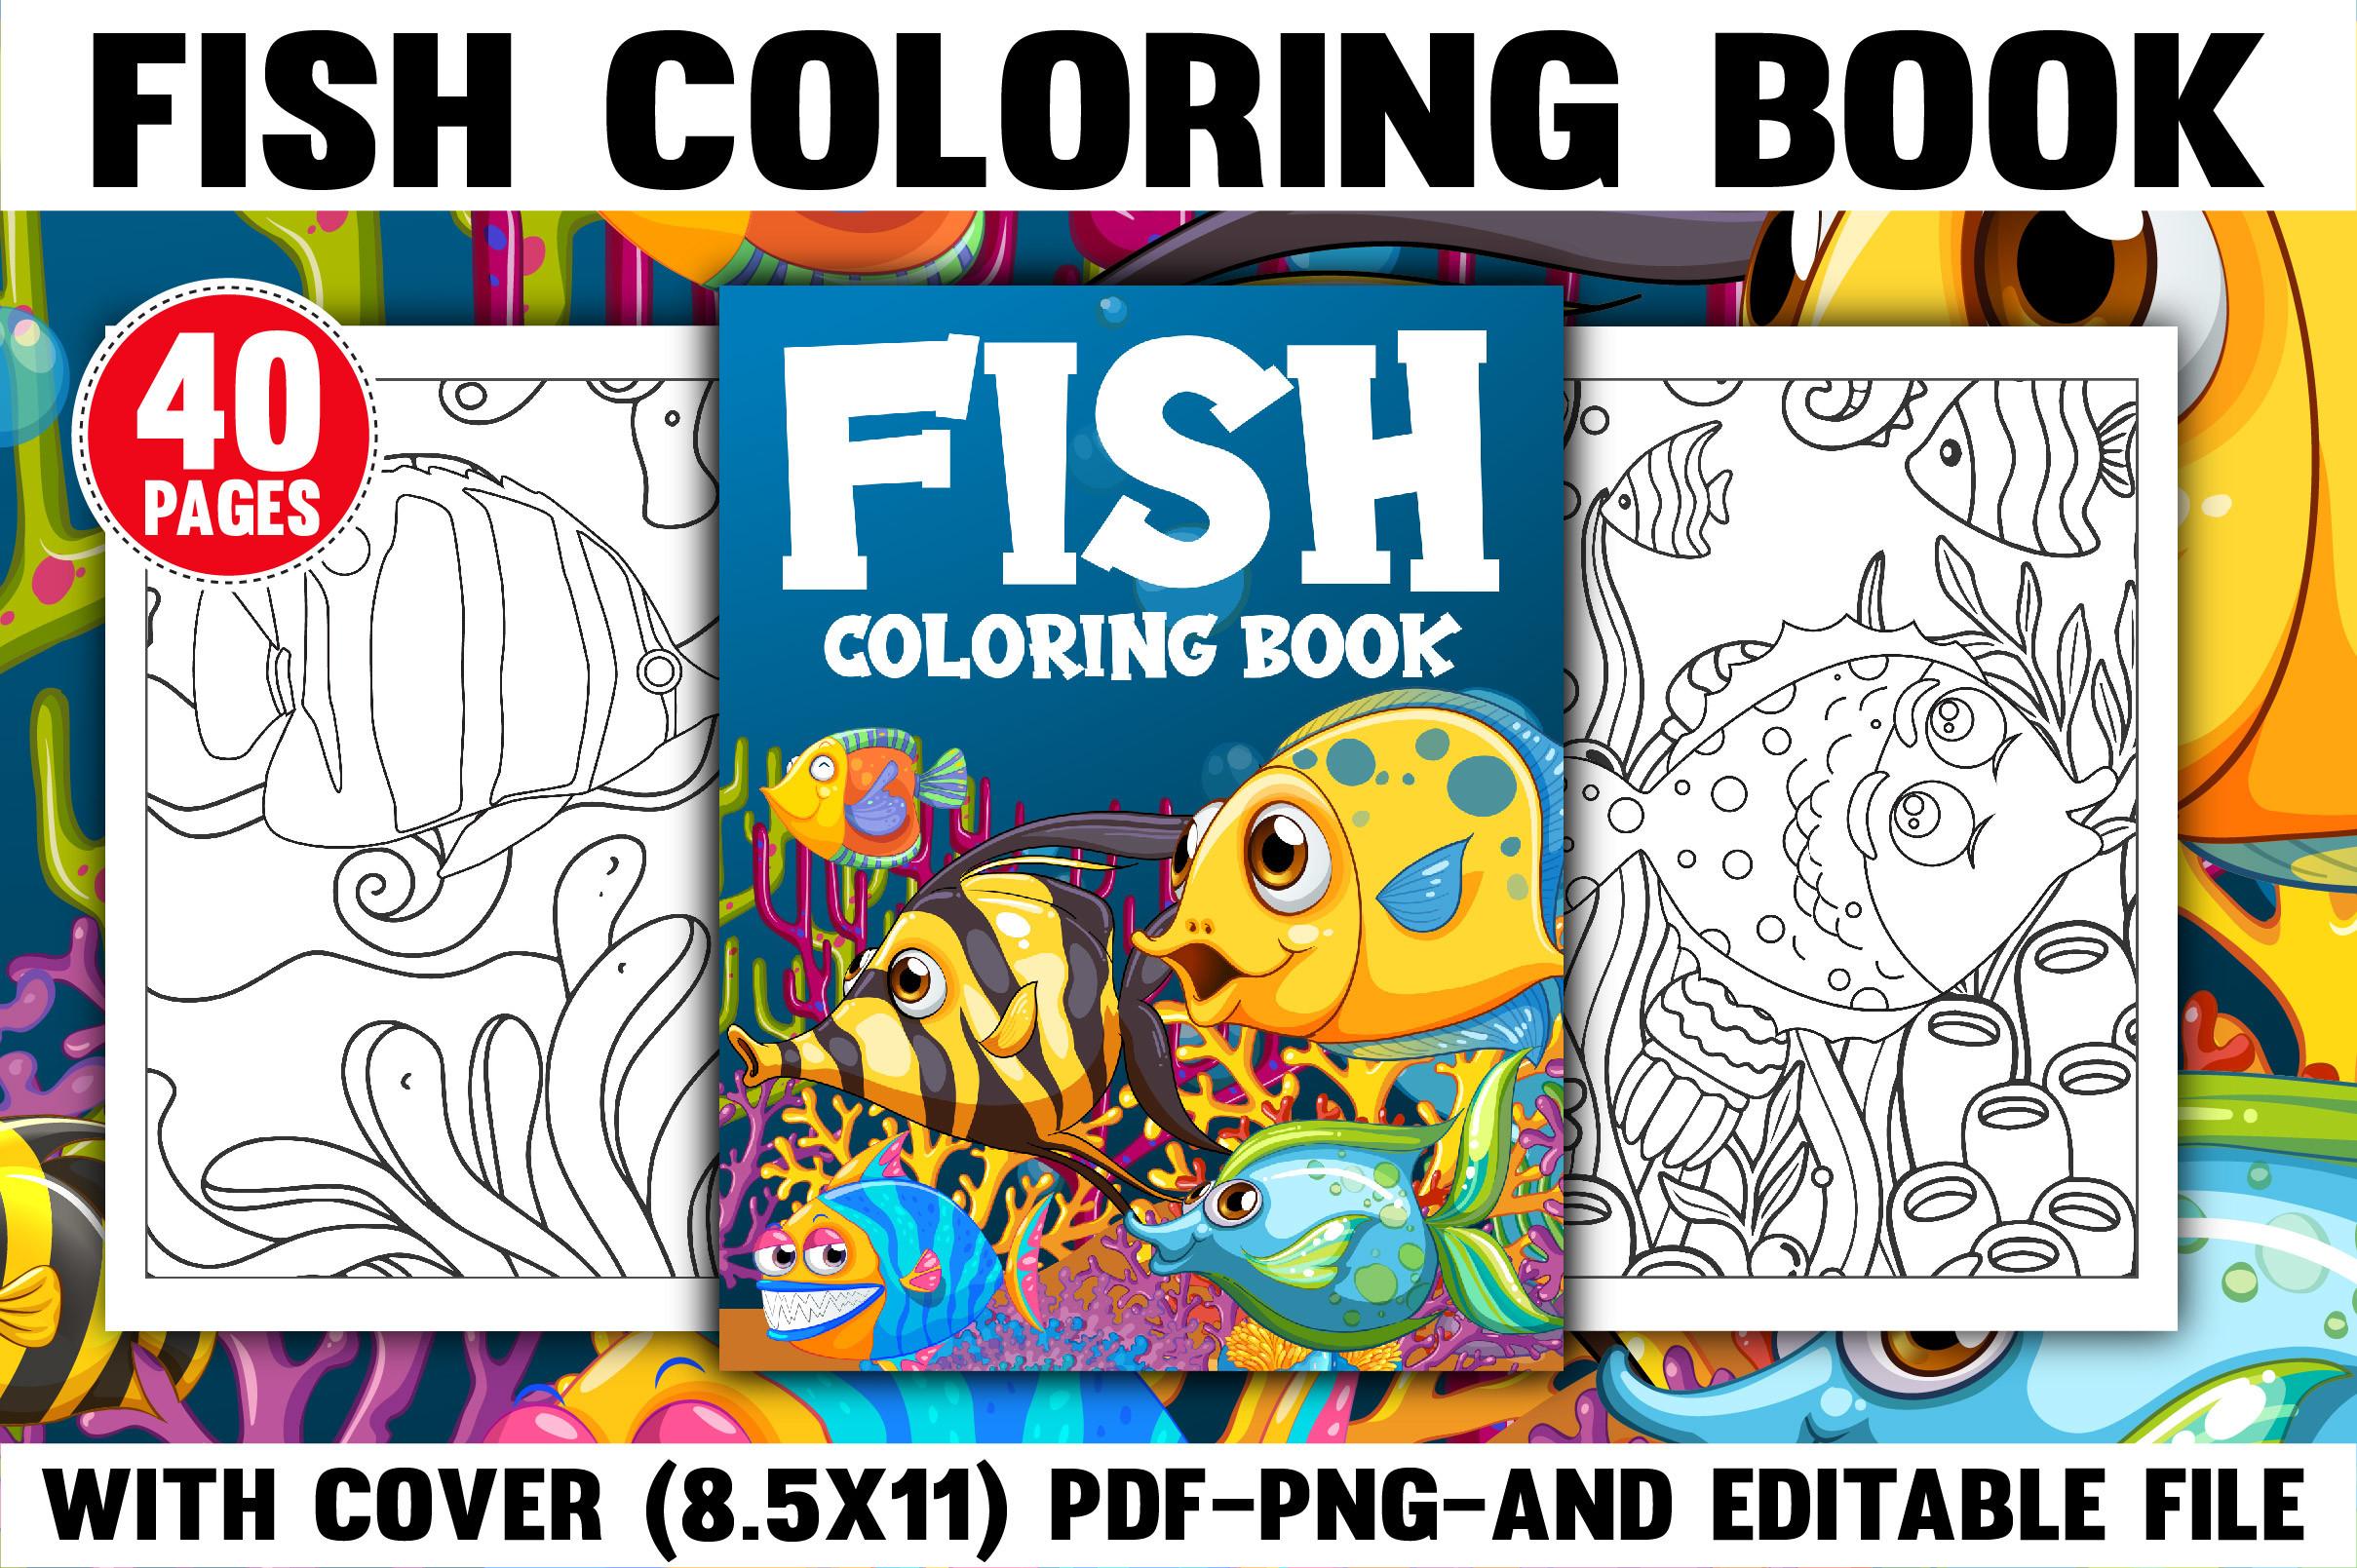 Fish Coloring Book with Cover Design